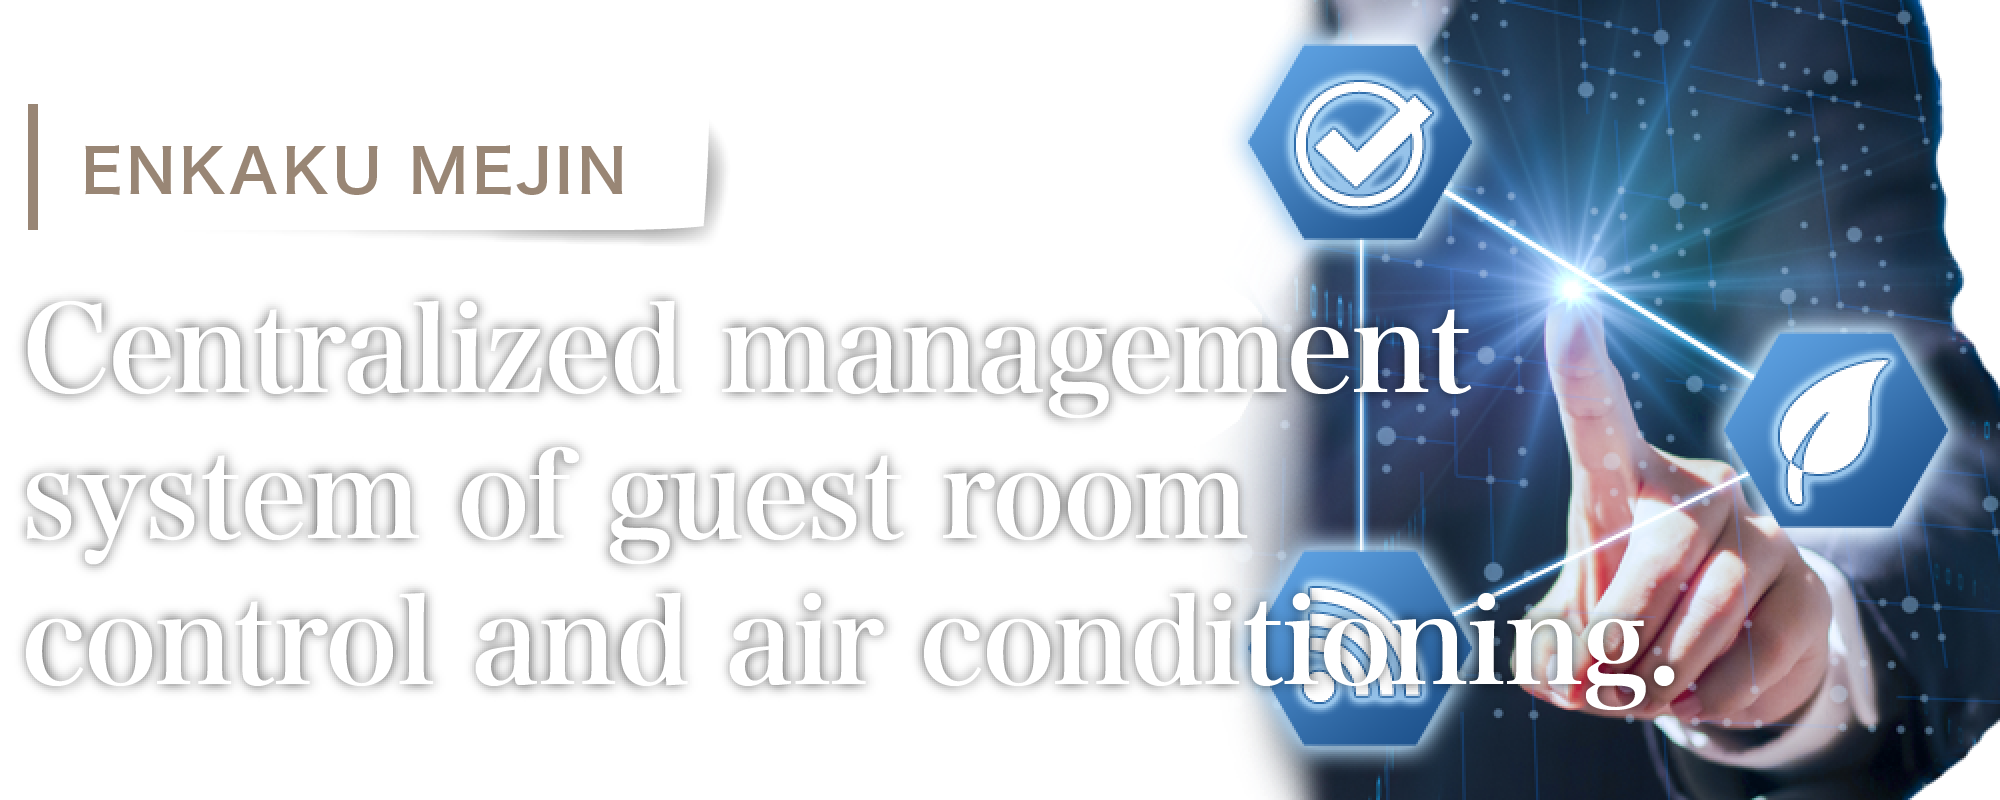 Centralized management system of guest room control and air conditioning.